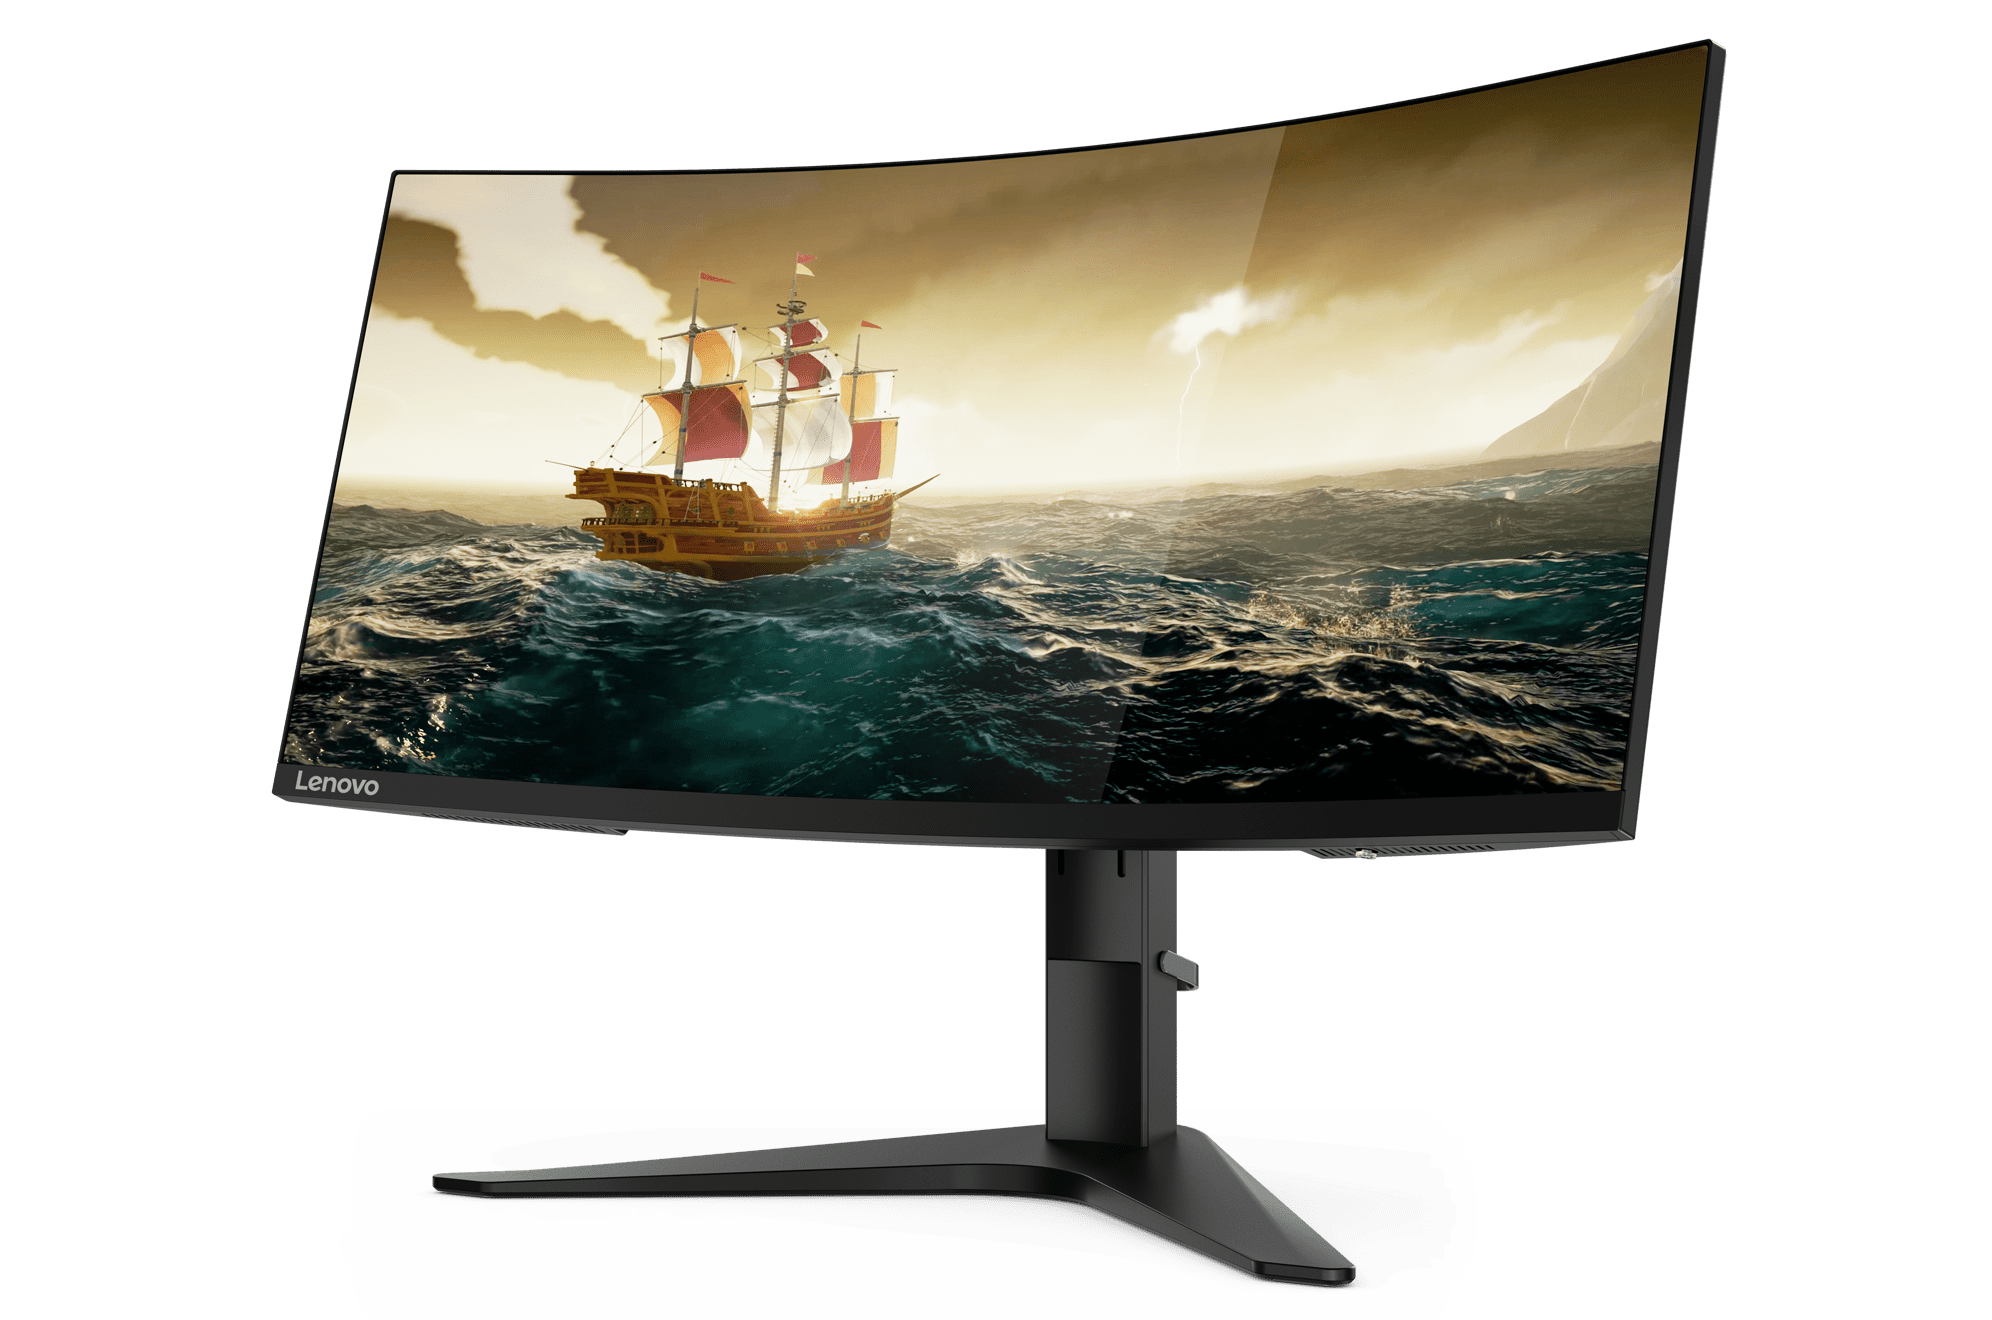 A higher refresh rate on the Lenovo G34w Gaming Monitor (144Hz) minimizes motion blur for natural player movements.